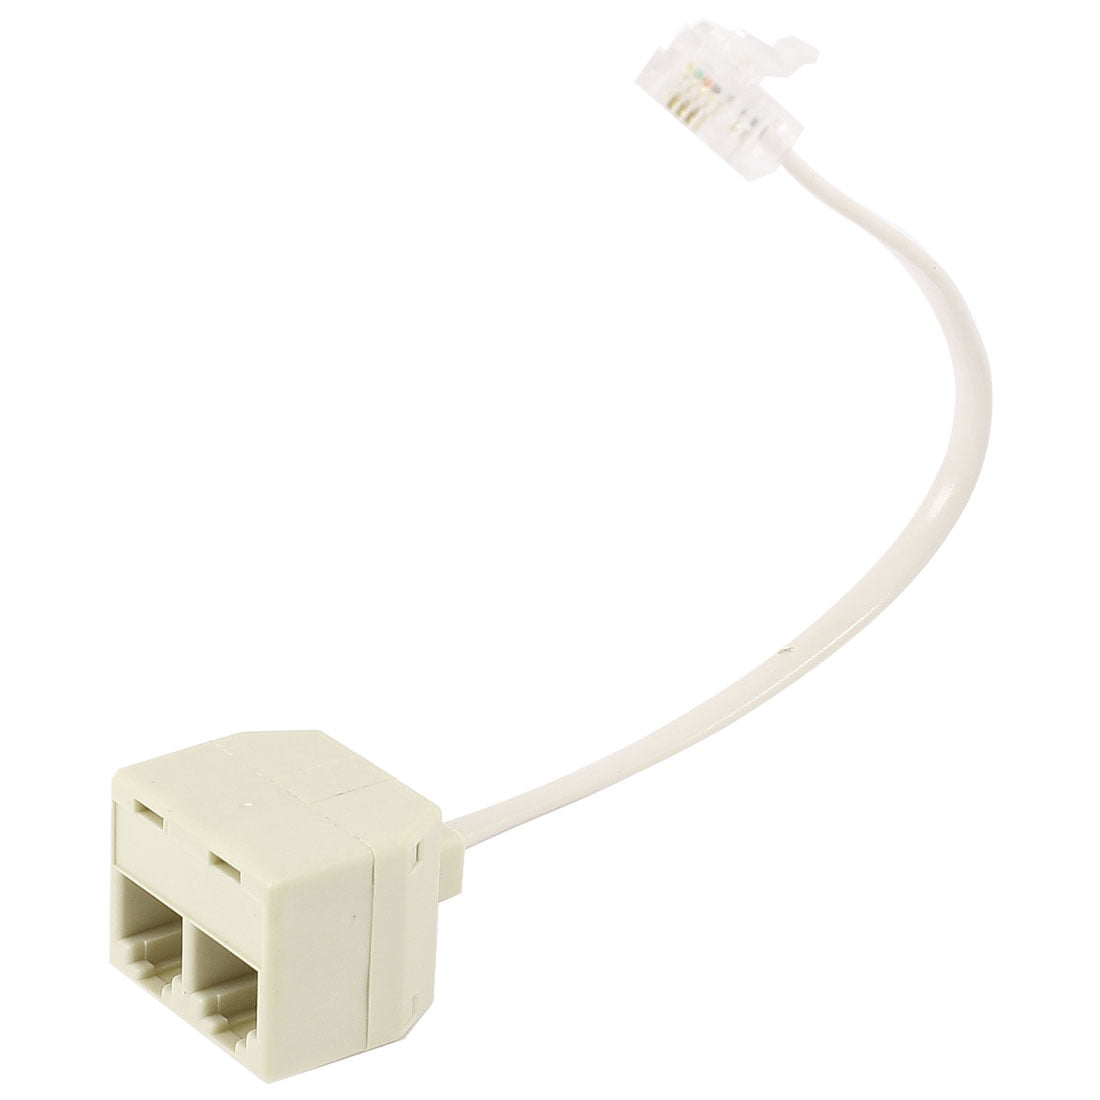 Details about   AT&T No.451A = DSL PHONE ADAPTER COUPLING ADAPTER EXTENSION PLUG ADAPTER 